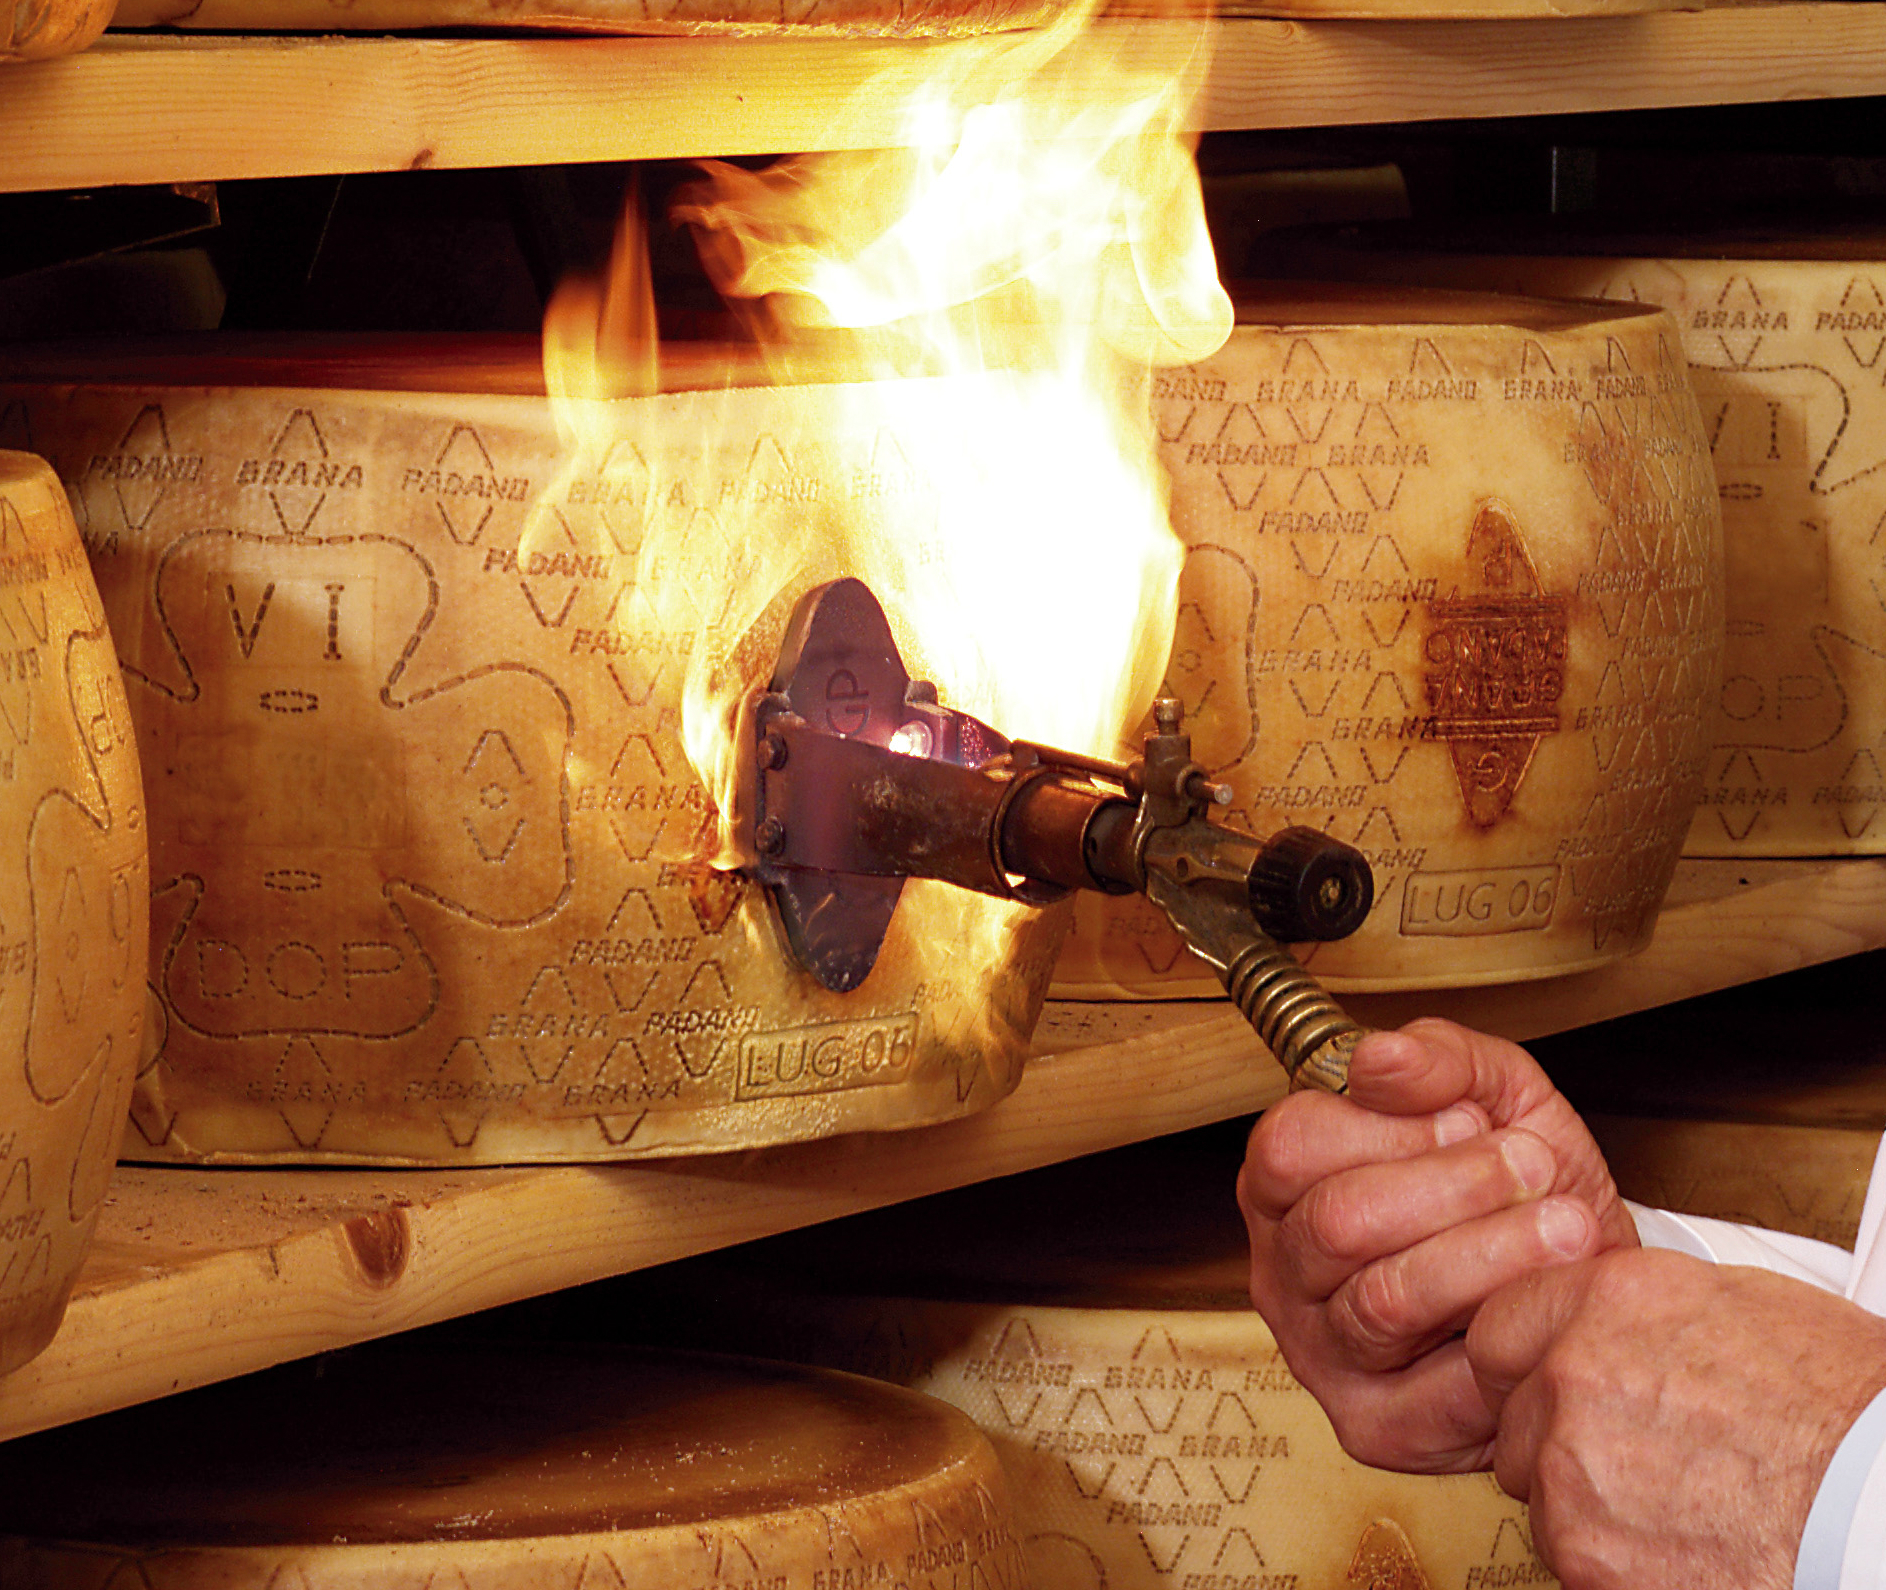 A cheese wheel gets fire-branded with the logo of the Grana Padano Consorzio